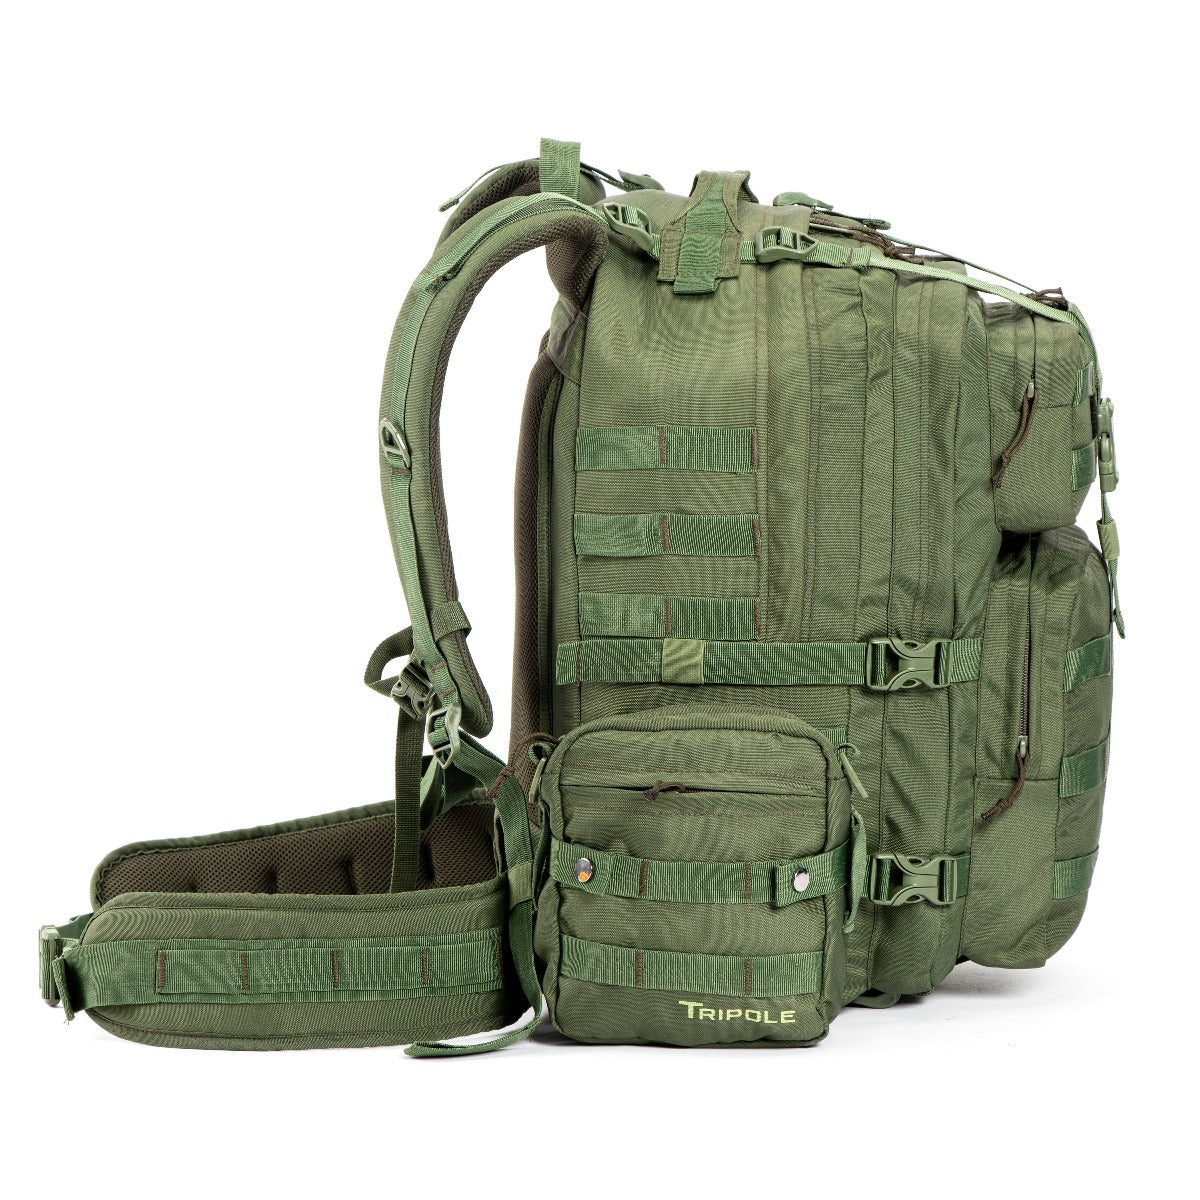 Tripole Alfa Military Tactical Backpack with Sling Bag Attachment -  46 Litres - Army Green 3